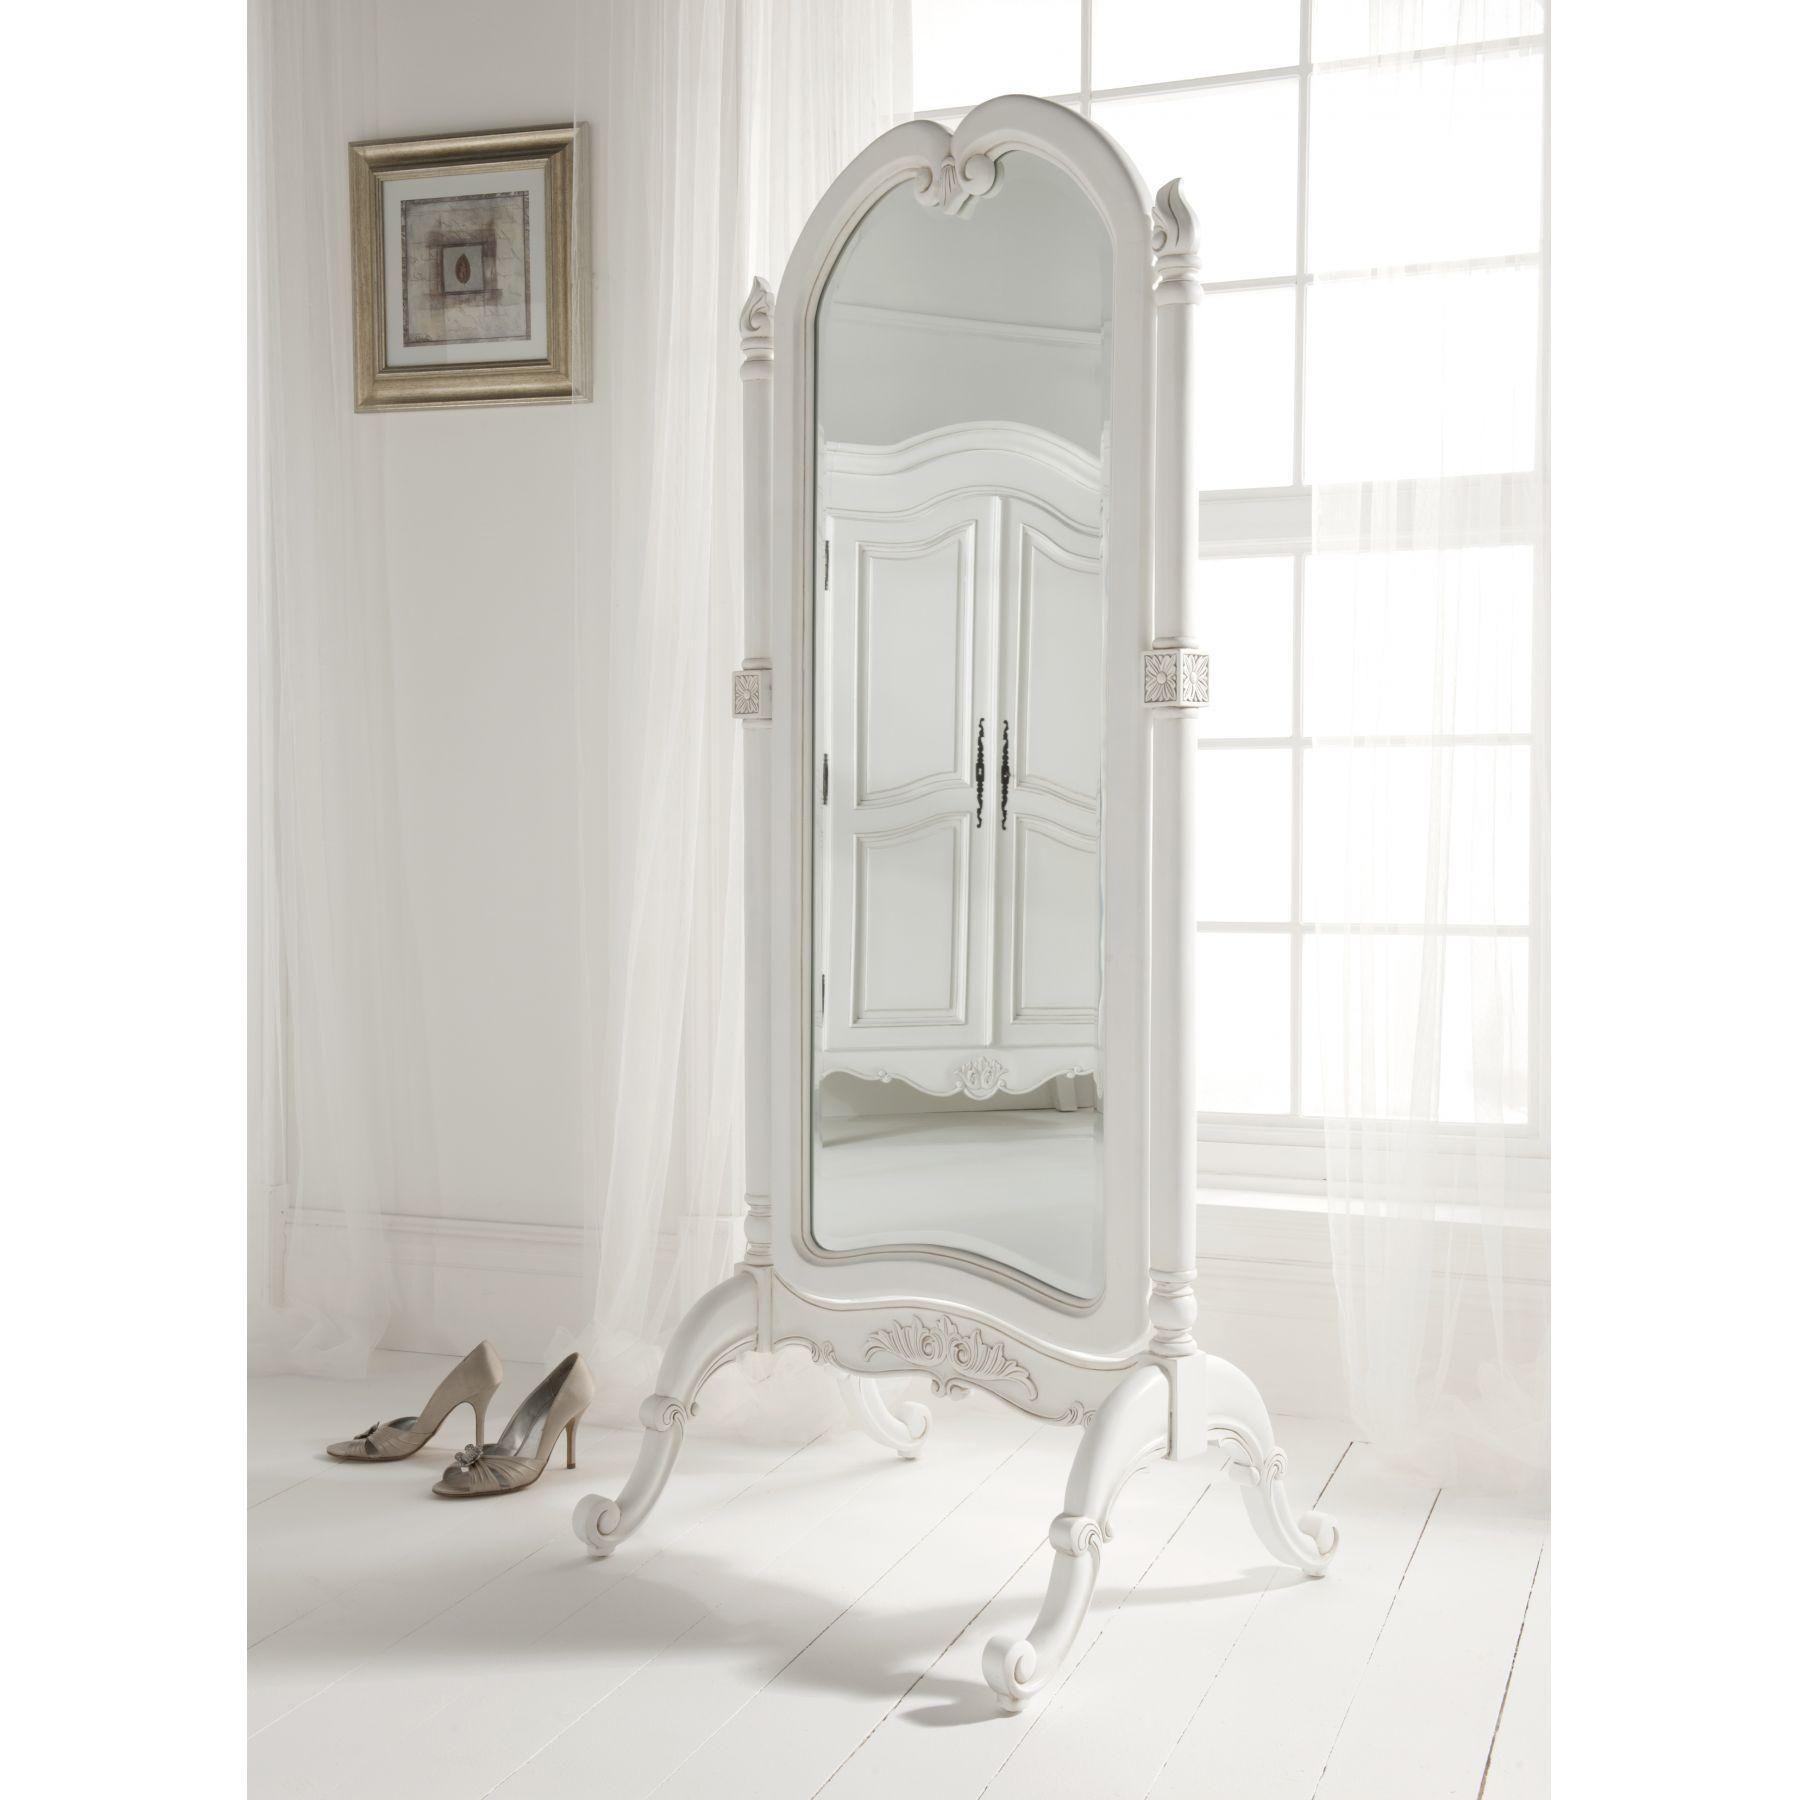 Furniture: Charming Cheval Mirror Jewelry Armoire Ideas Regarding Free Standing Bedroom Mirrors (View 5 of 20)